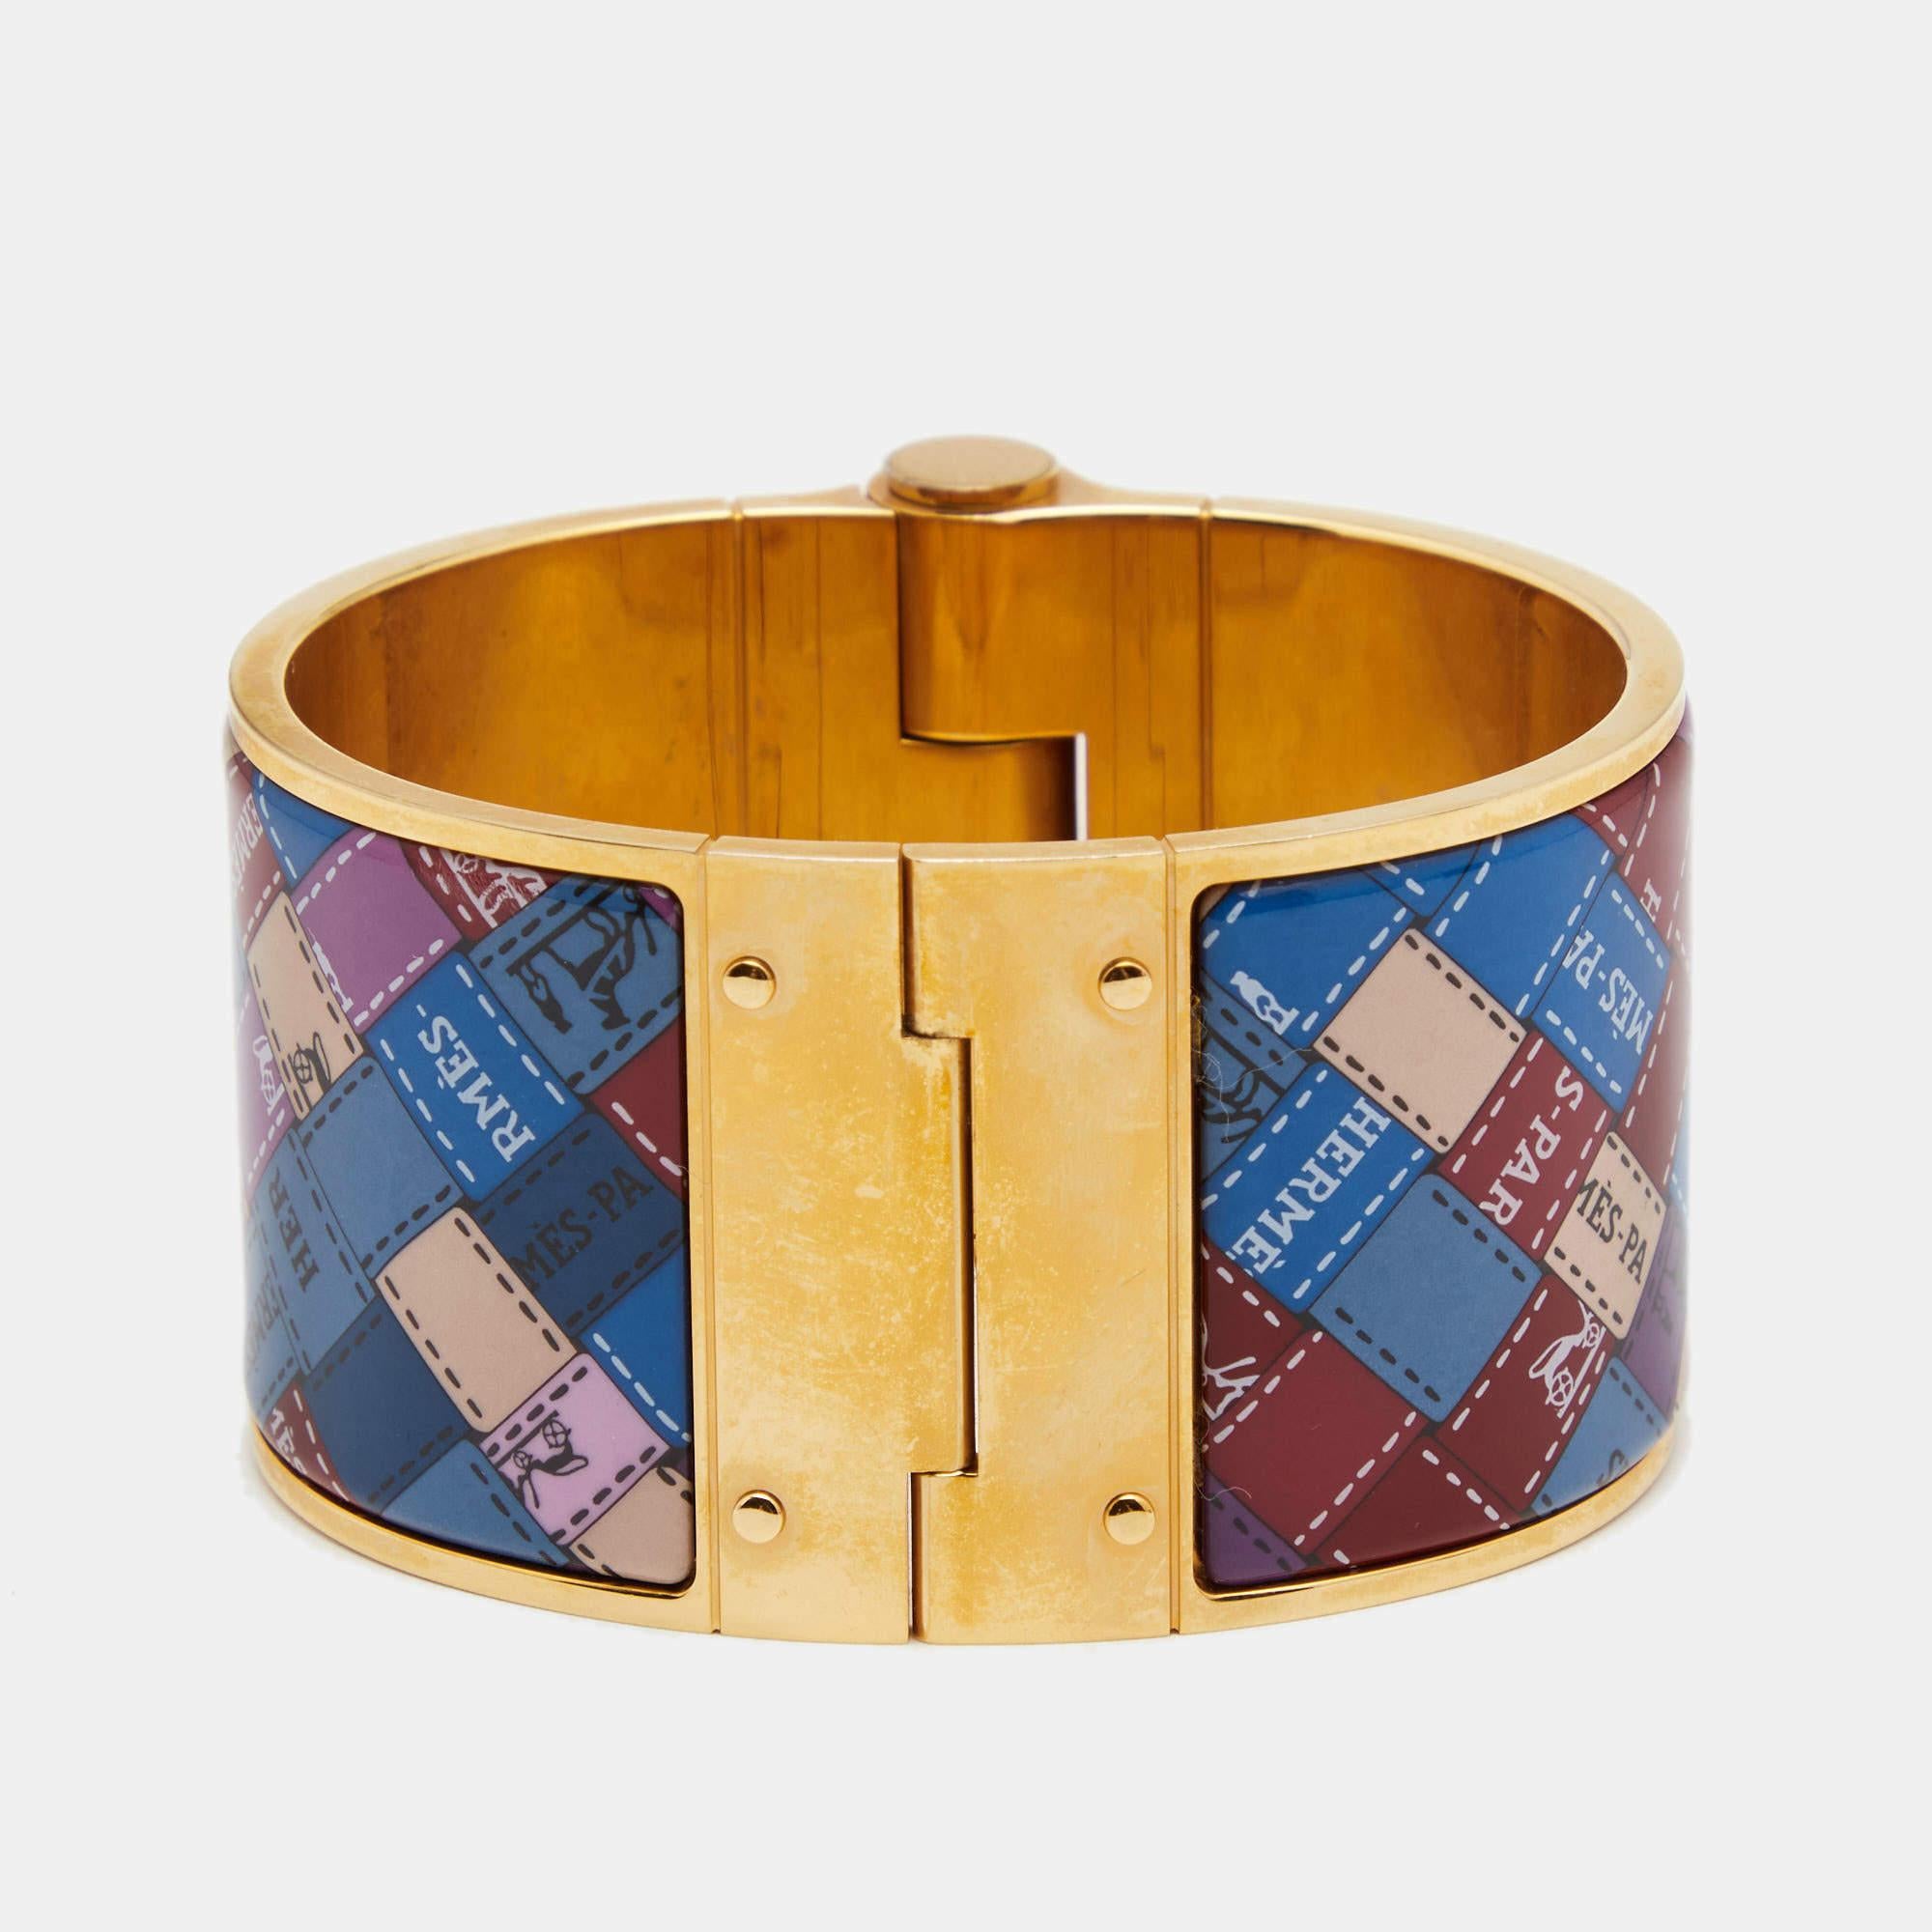 On days you want to make a statement with your accessories, this Hermès bracelet will be your ideal choice. The creation comes in a wide silhouette and is elevated by the Bolduc Au Carre prints all over. The gold-plated fittings make this hinged